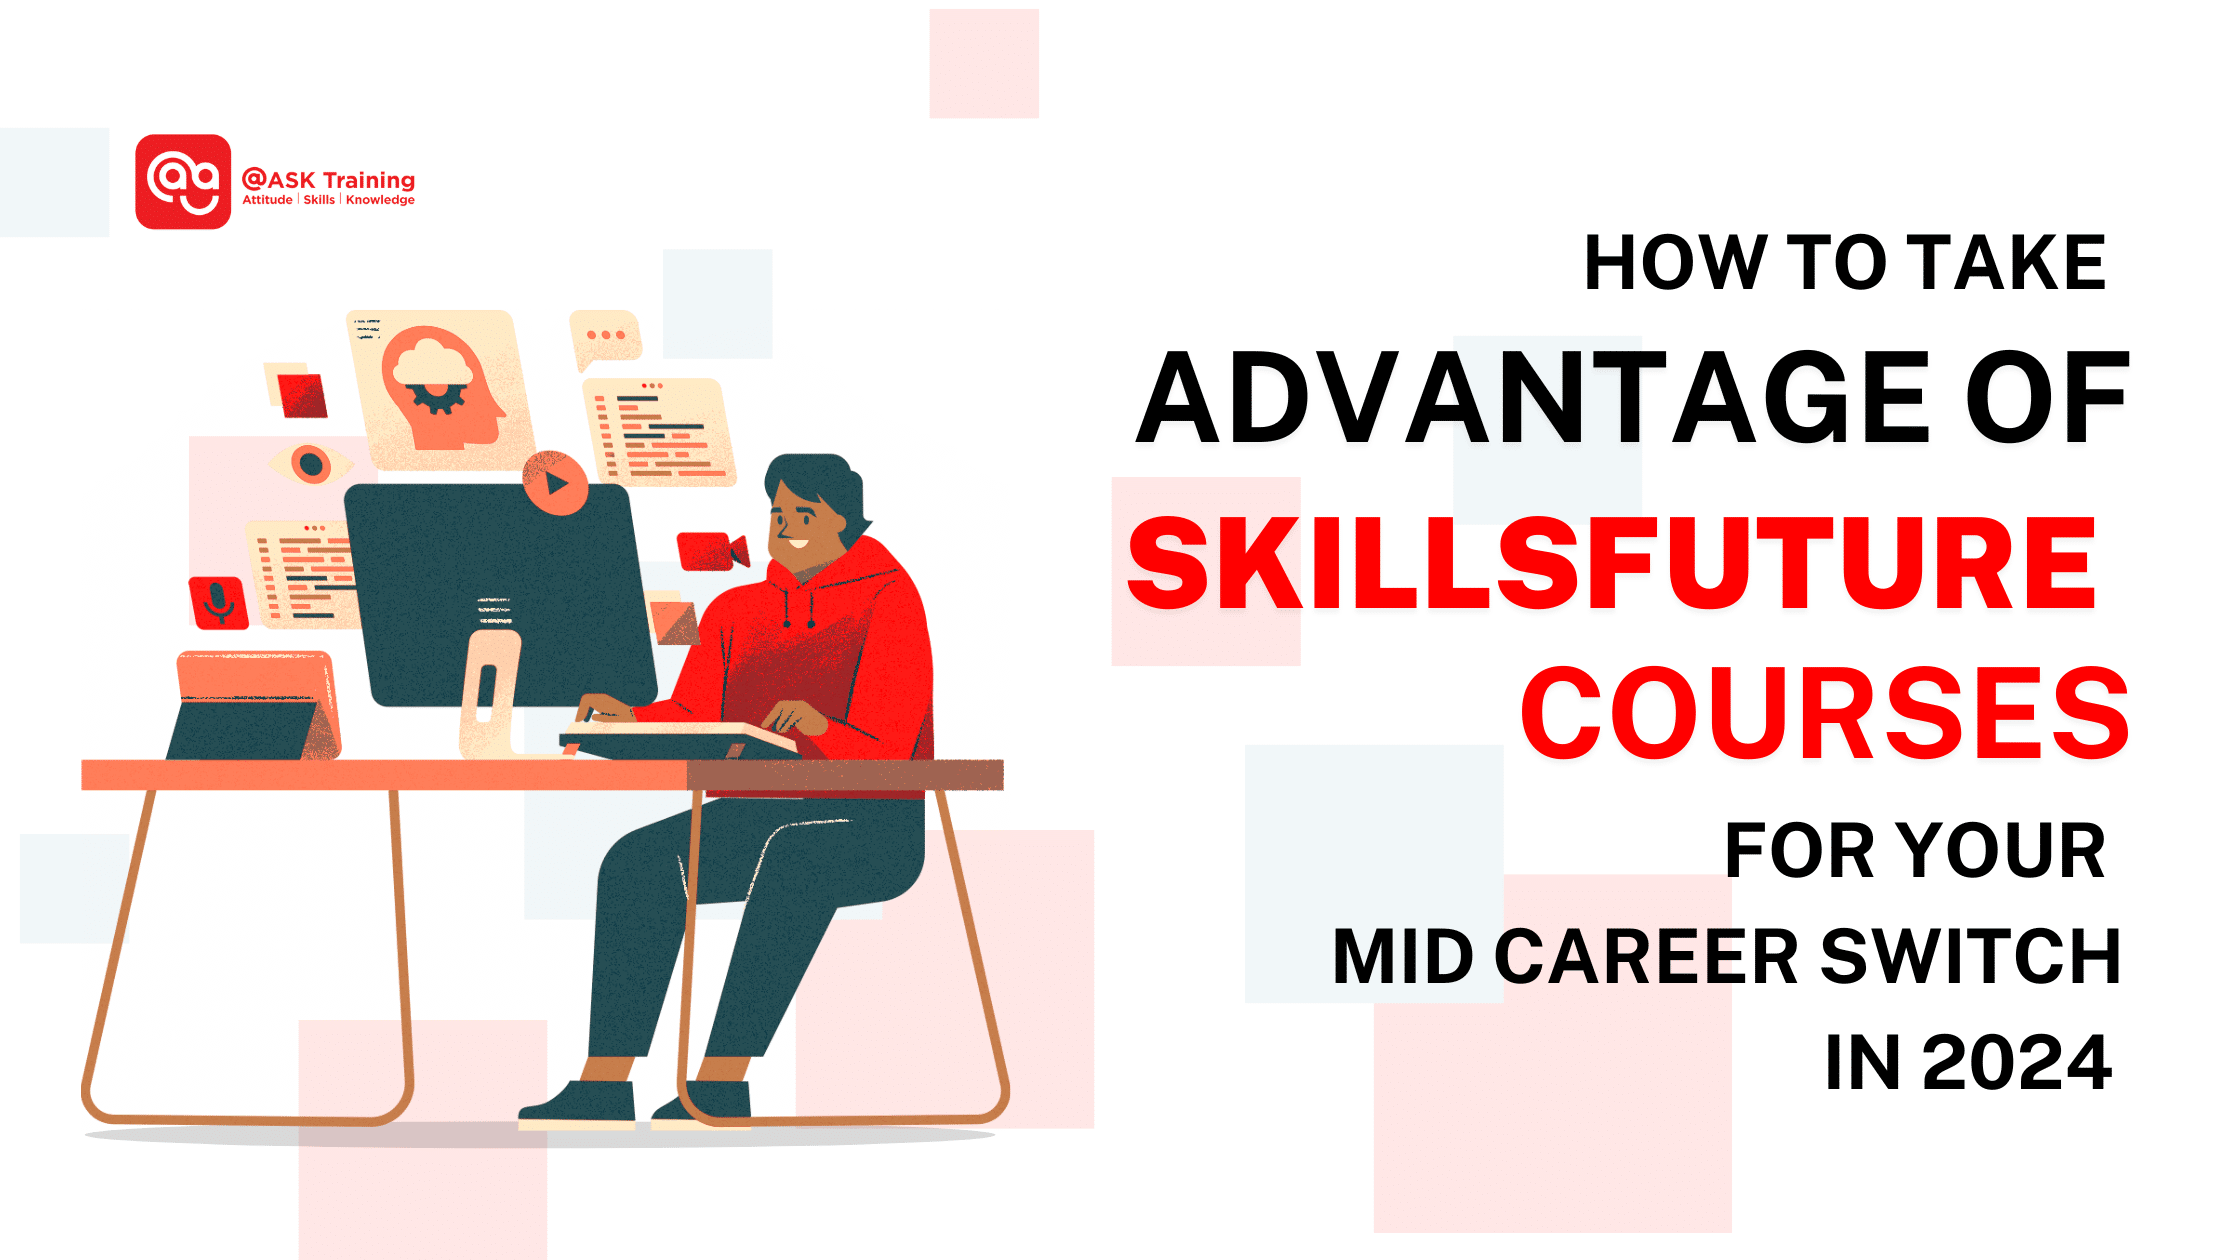 How to take advantage of SkillsFuture Courses for your mid-career switch in 2024